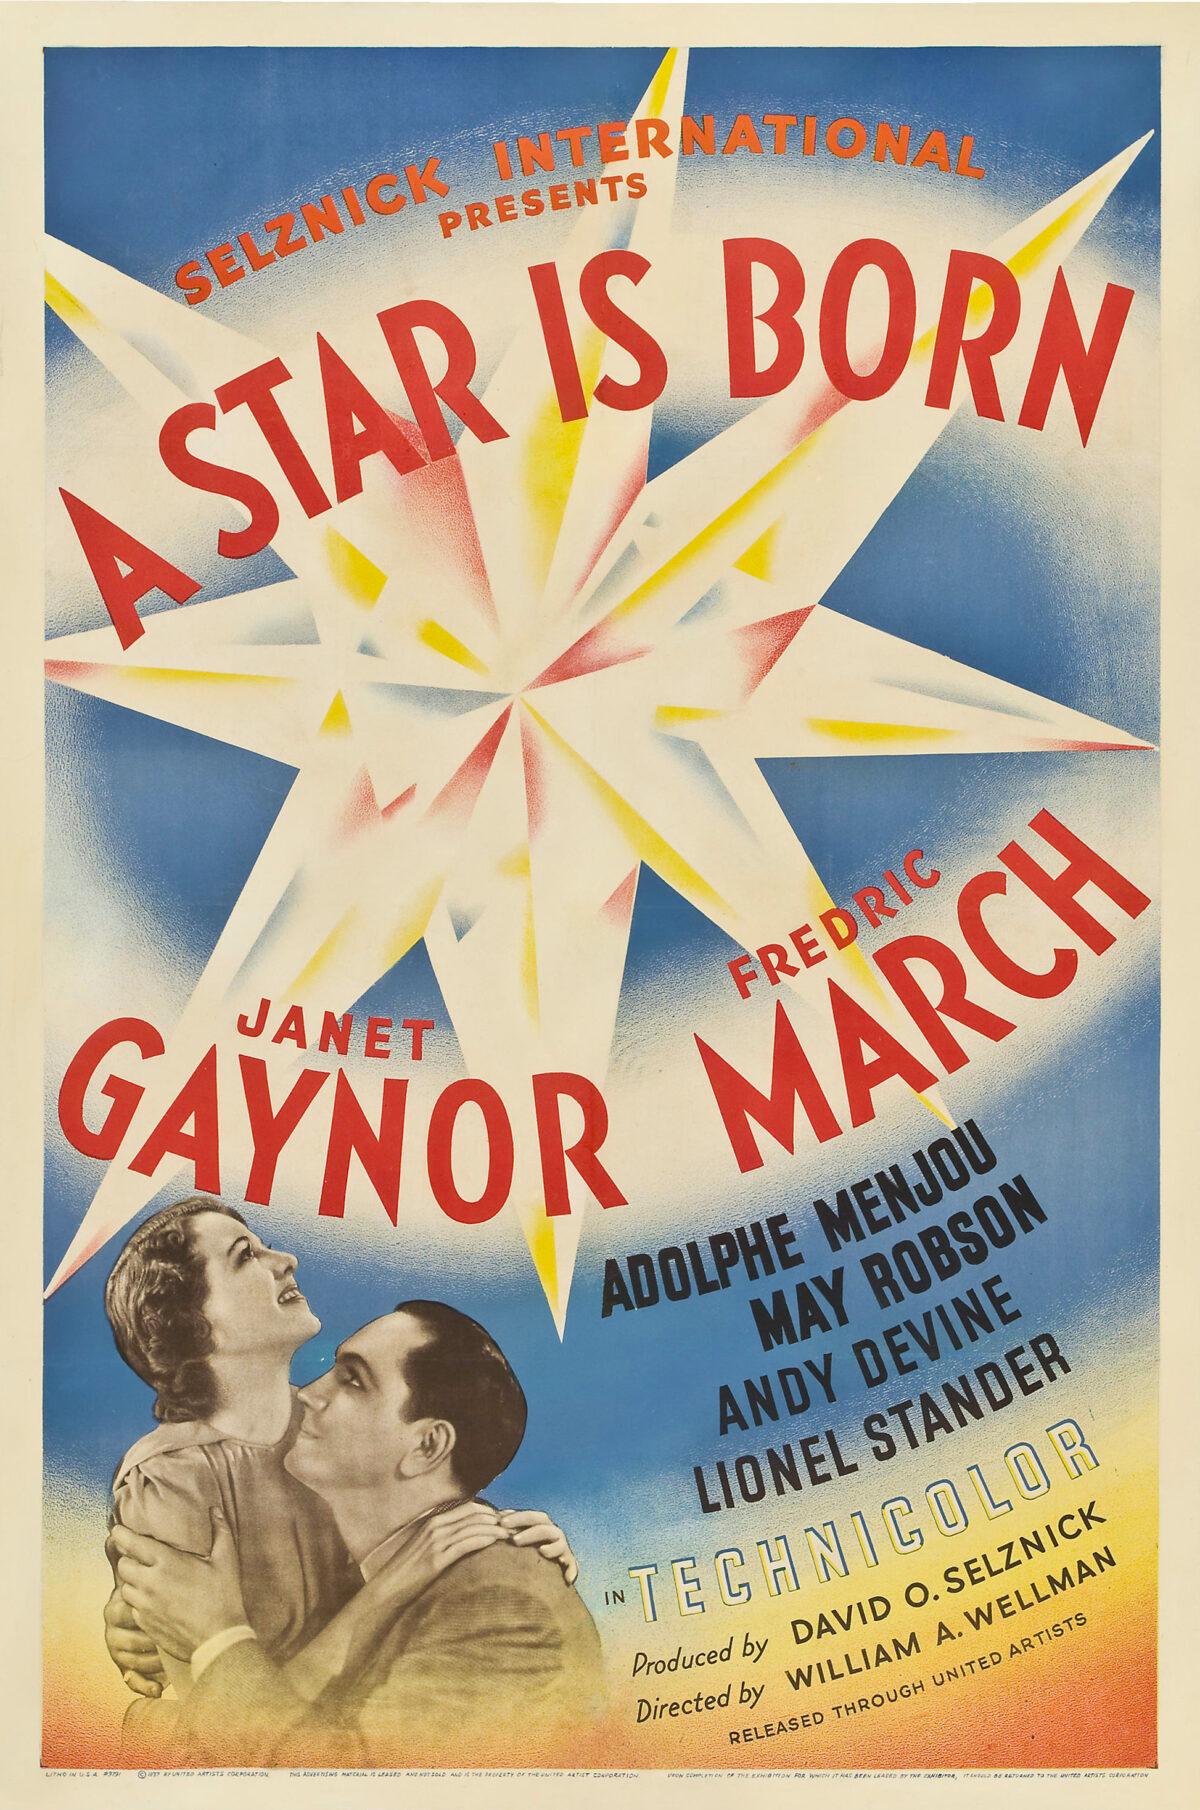 Theatrical release poster for the 1937 American film "A Star Is Born." (Public Domain)